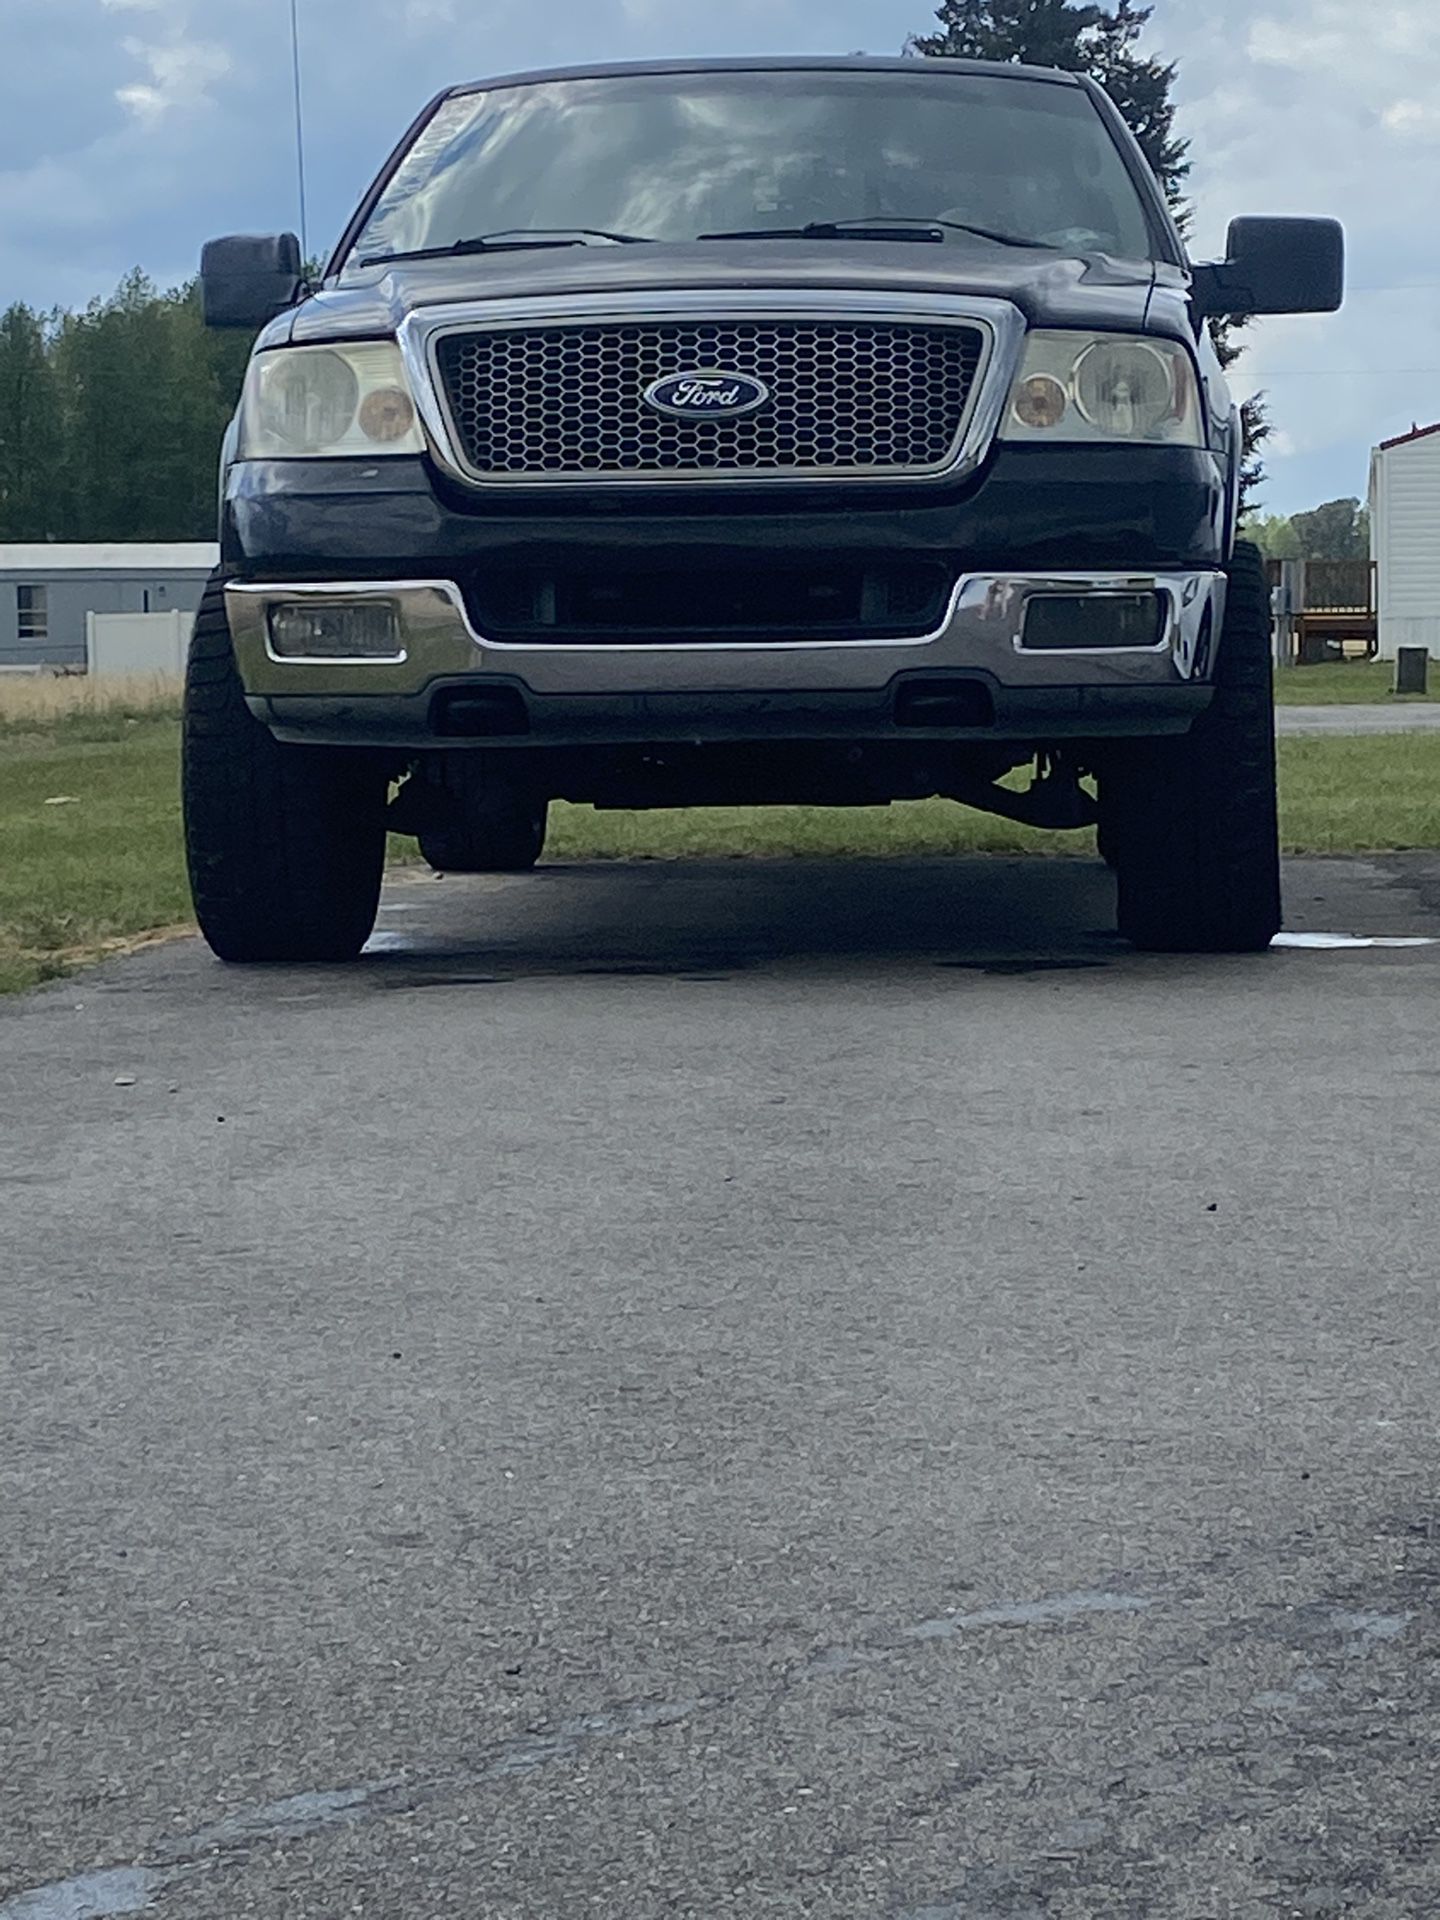 Looking To Trade Or Sell Looking Pickups Or Lifted Trucks